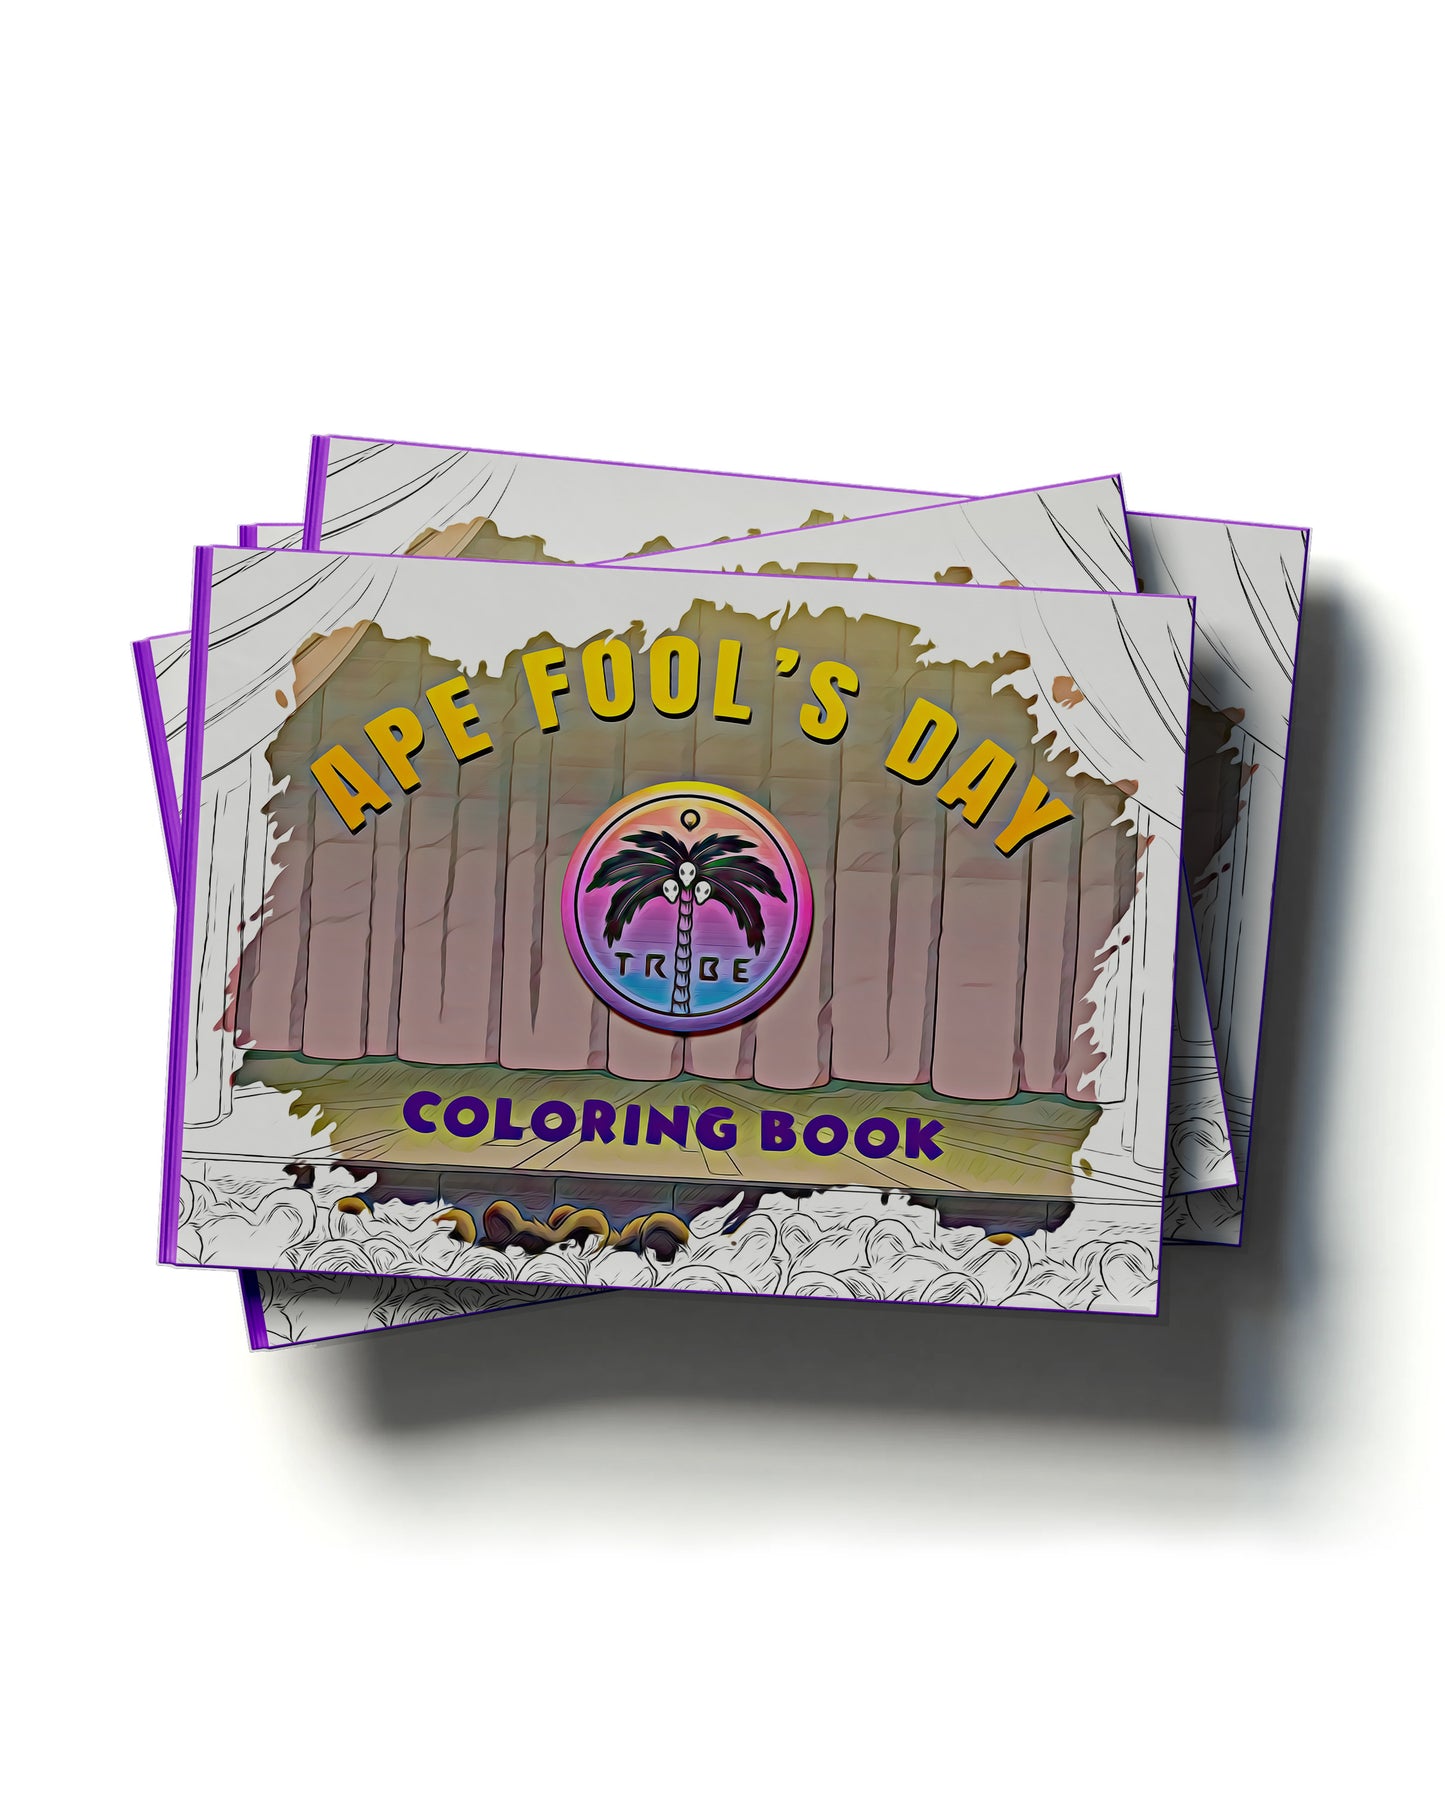 Ape Fool’s Day - Children’s Coloring Book